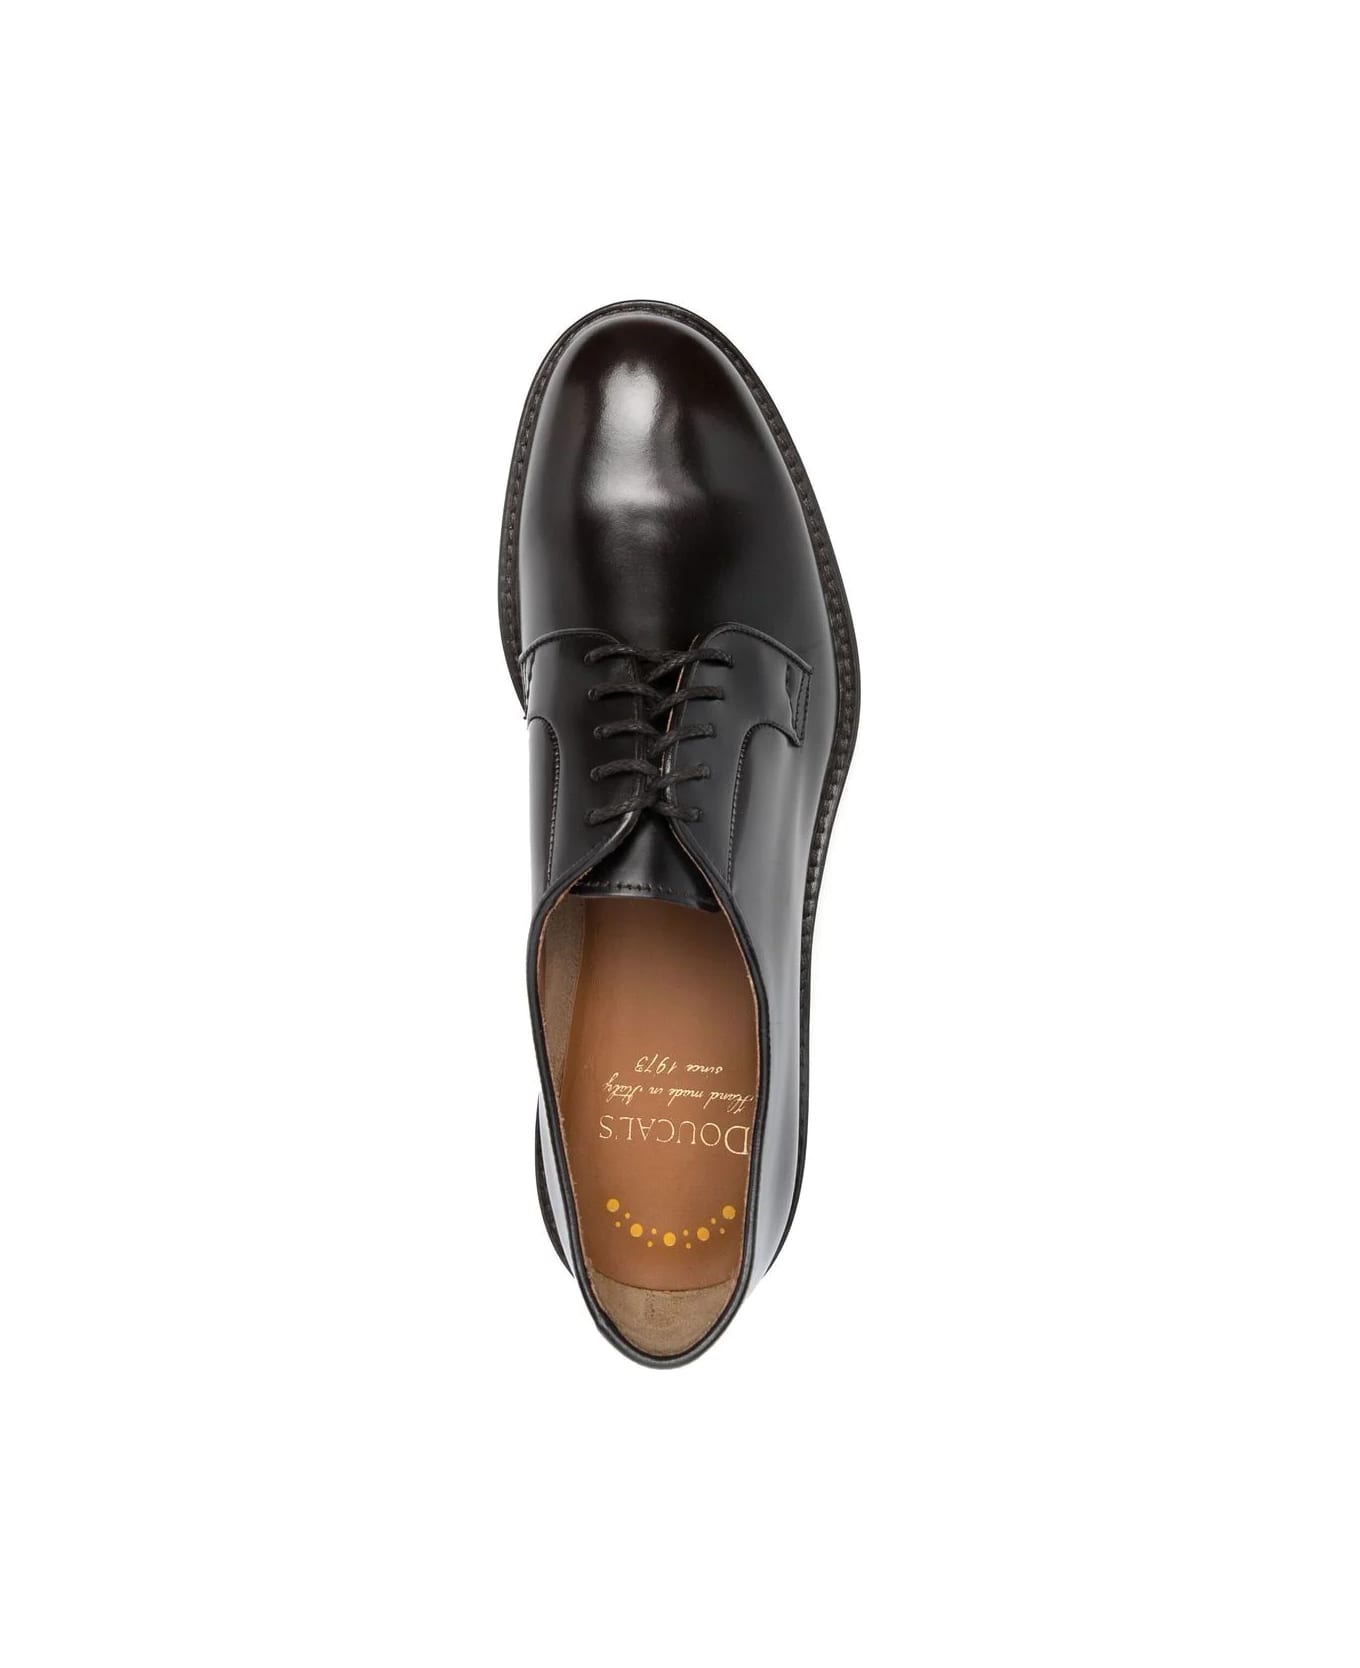 Doucal's Derby Shoes - Ebano